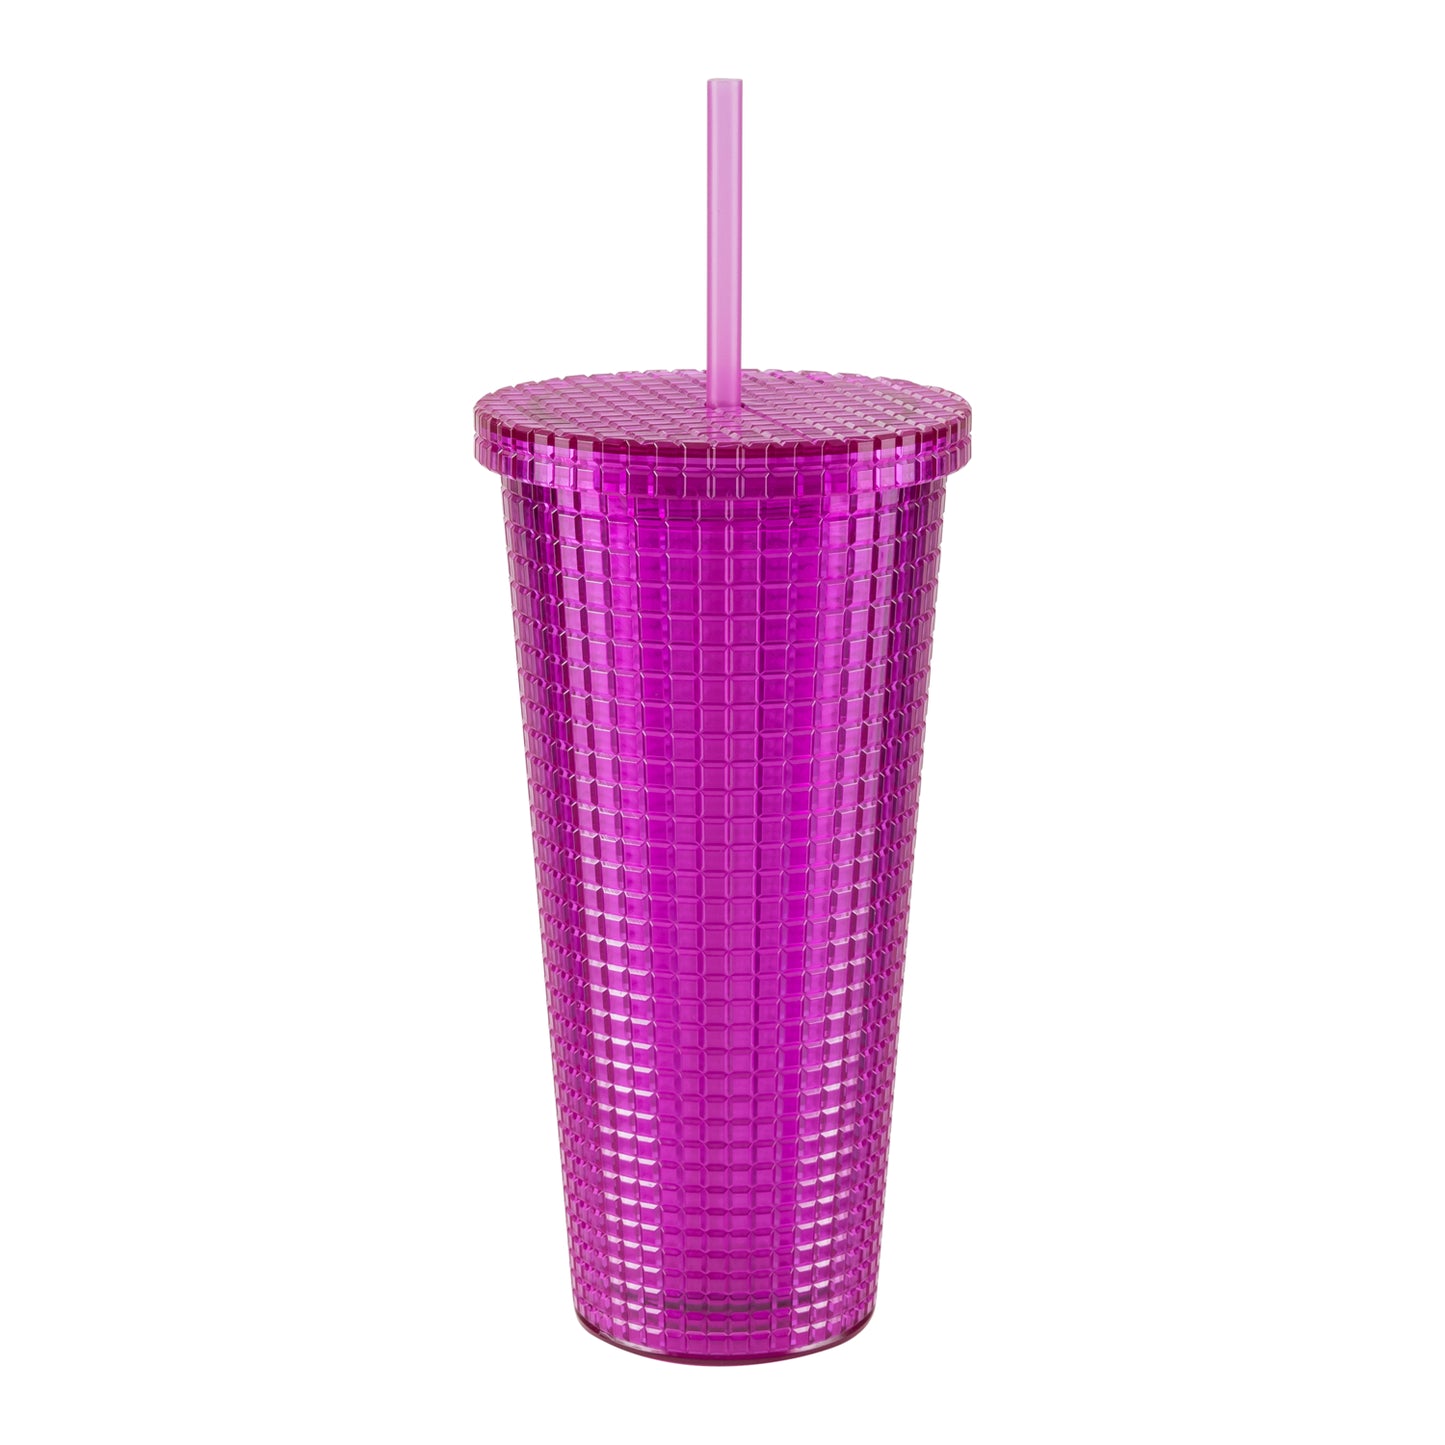 Cool Gear 3-Pack 23 oz Jem Chiller with Reusable Straw | Dishwasher Safe, Spillproof, Double-Wall Insulated Travel Tumbler | Trendy, Textured Design - Plum Pack